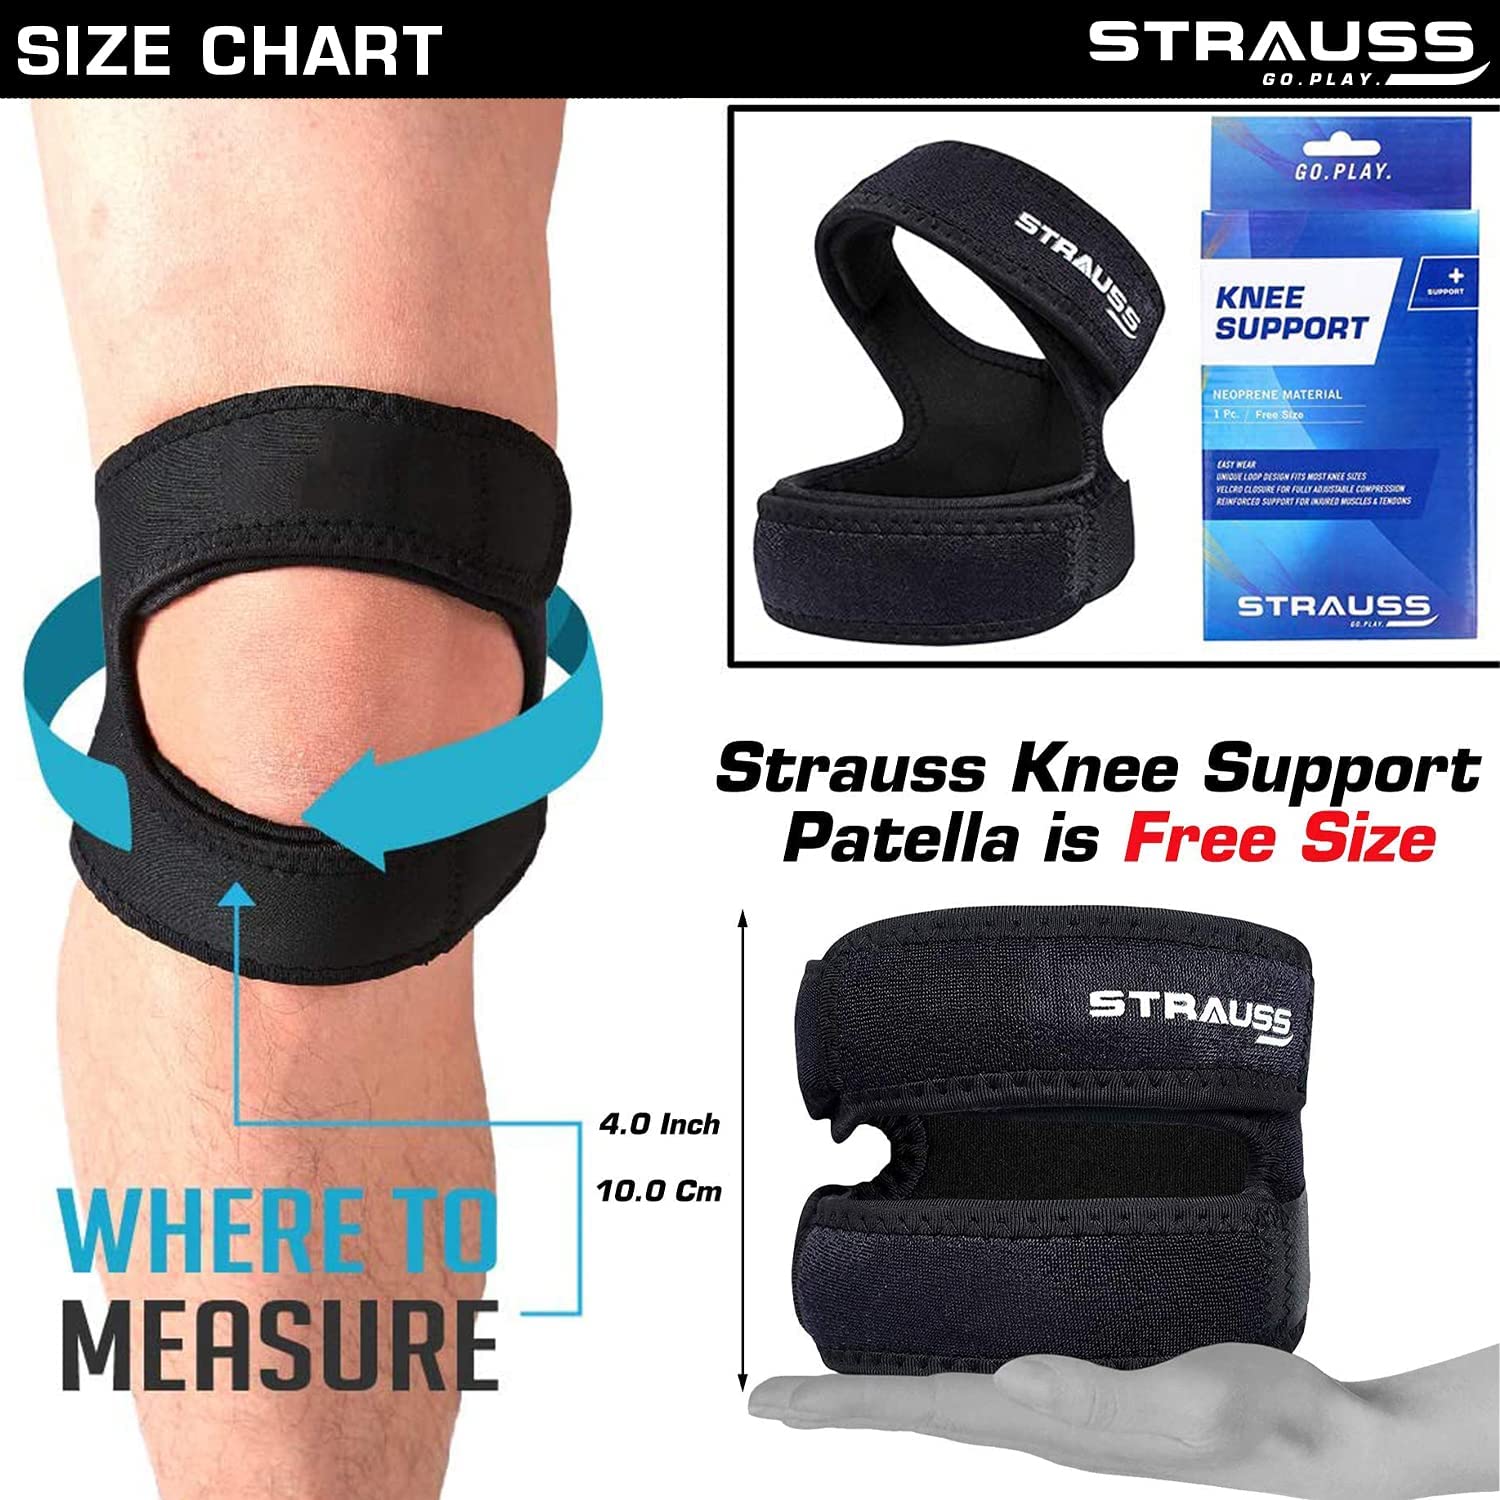 Strauss Pattela Strap Knee Support, Free Size, (Black) (Dual Strap